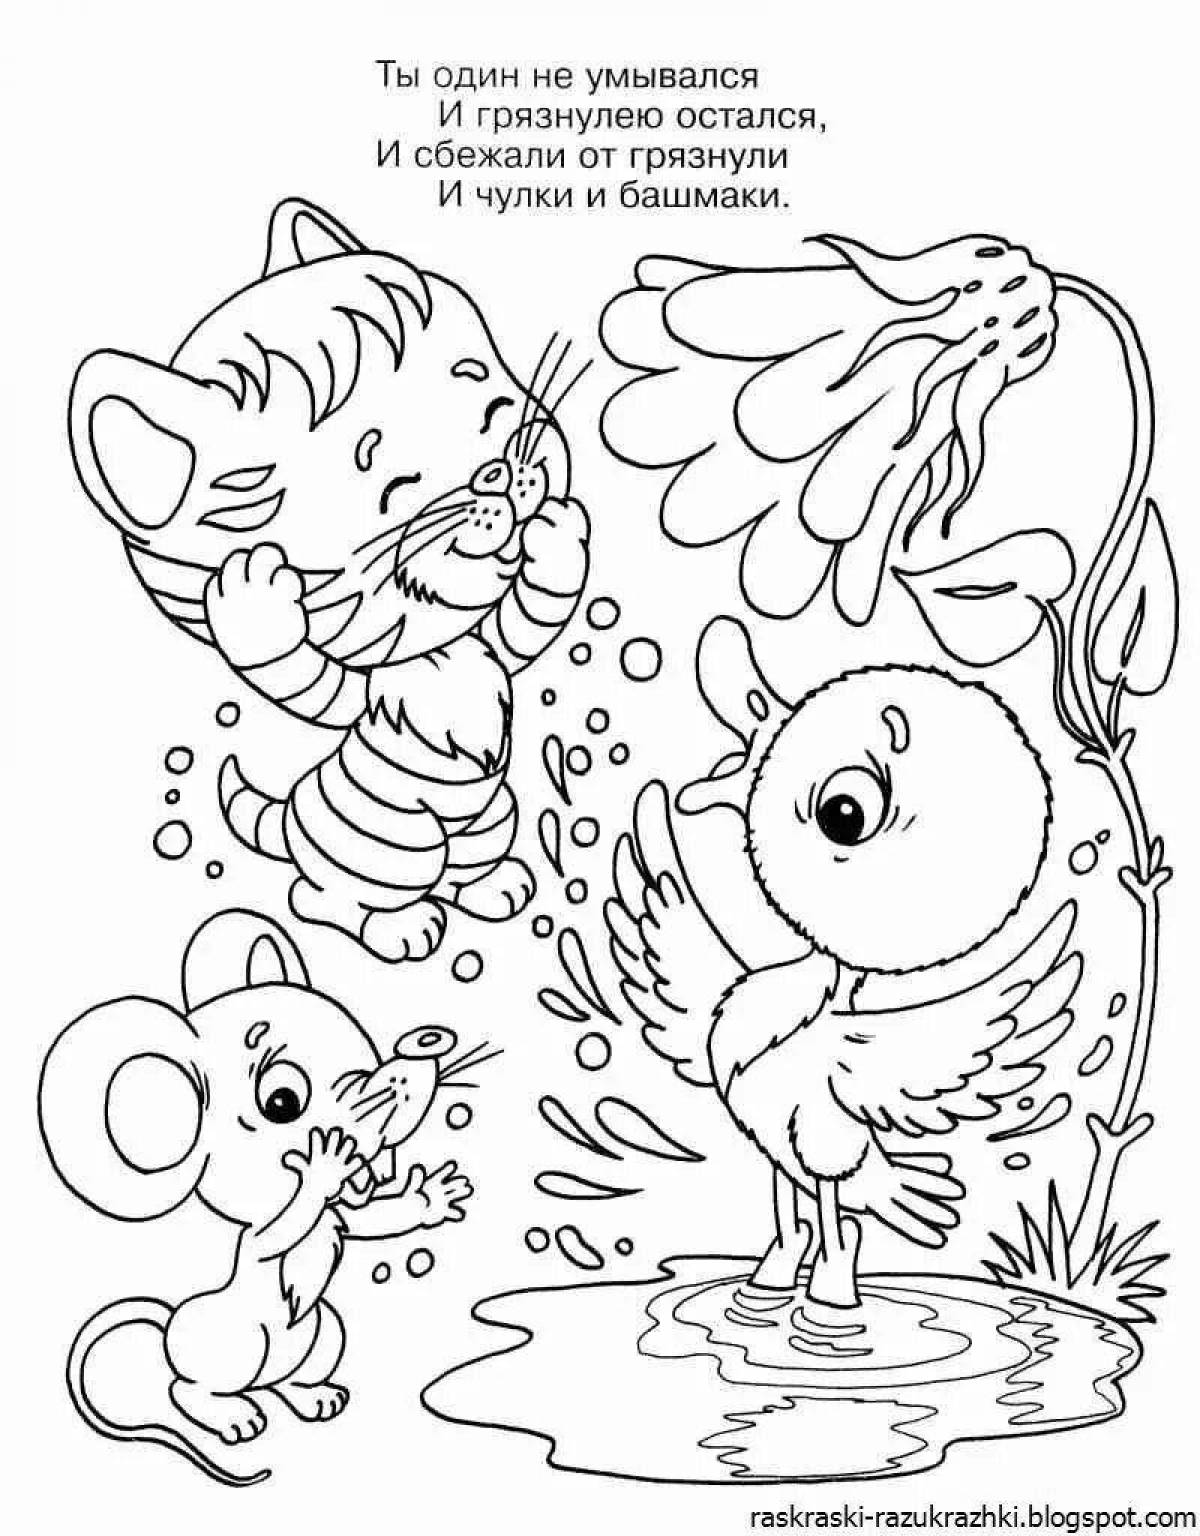 Magnificent Chukovsky coloring book